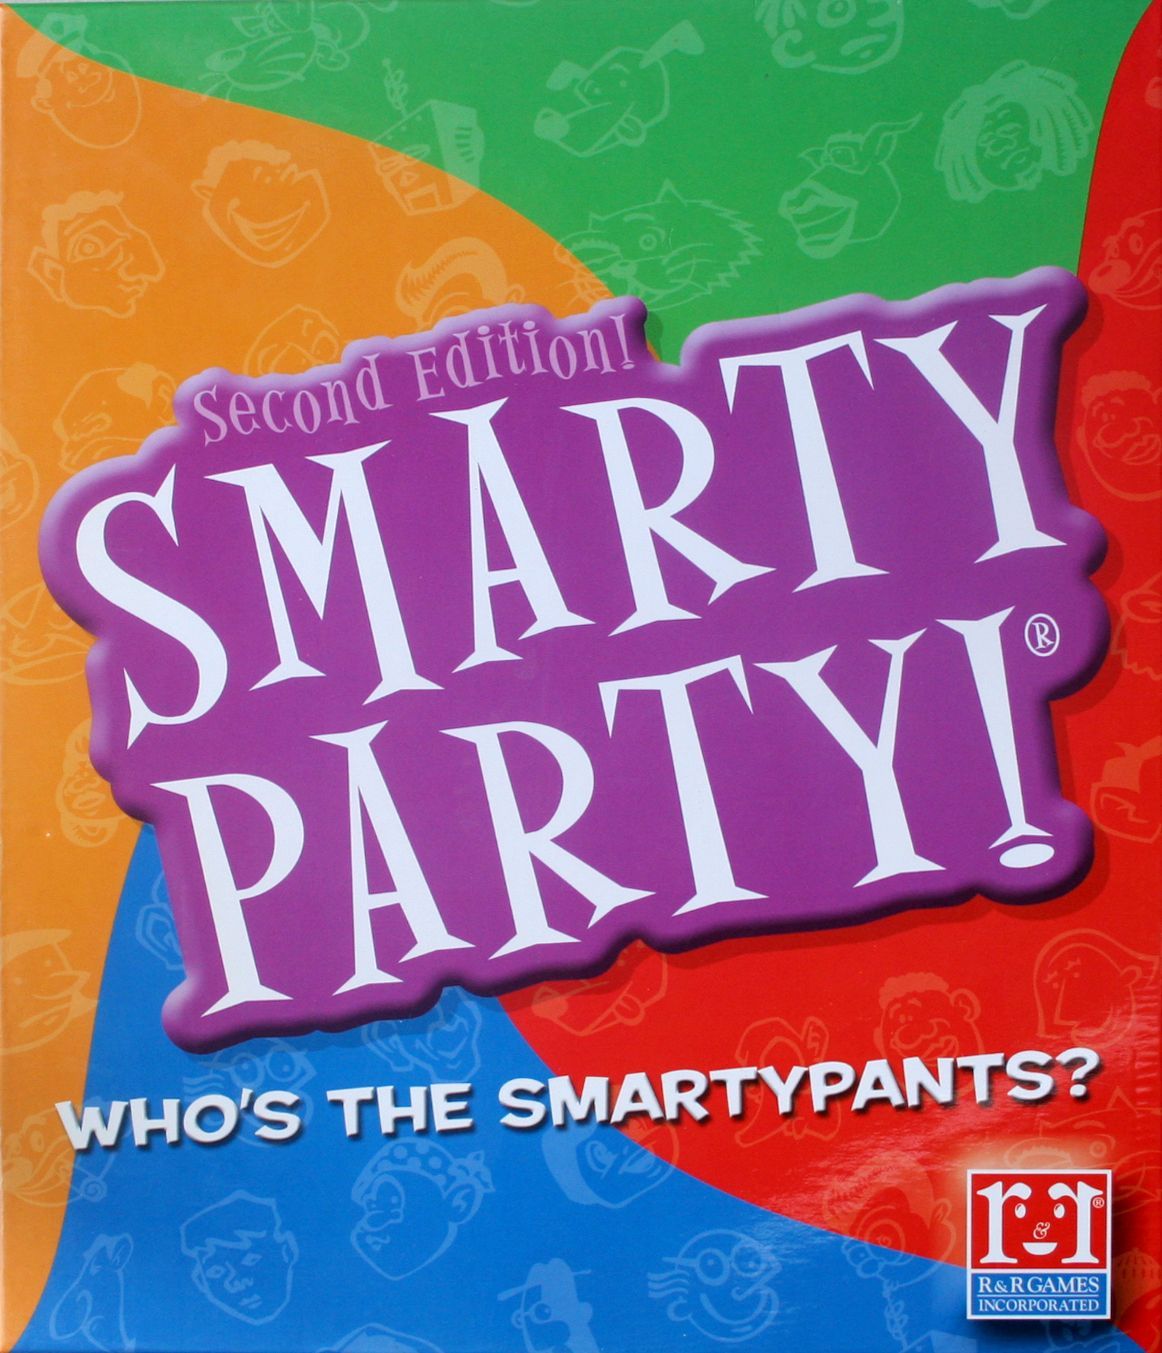 Smarty Party!